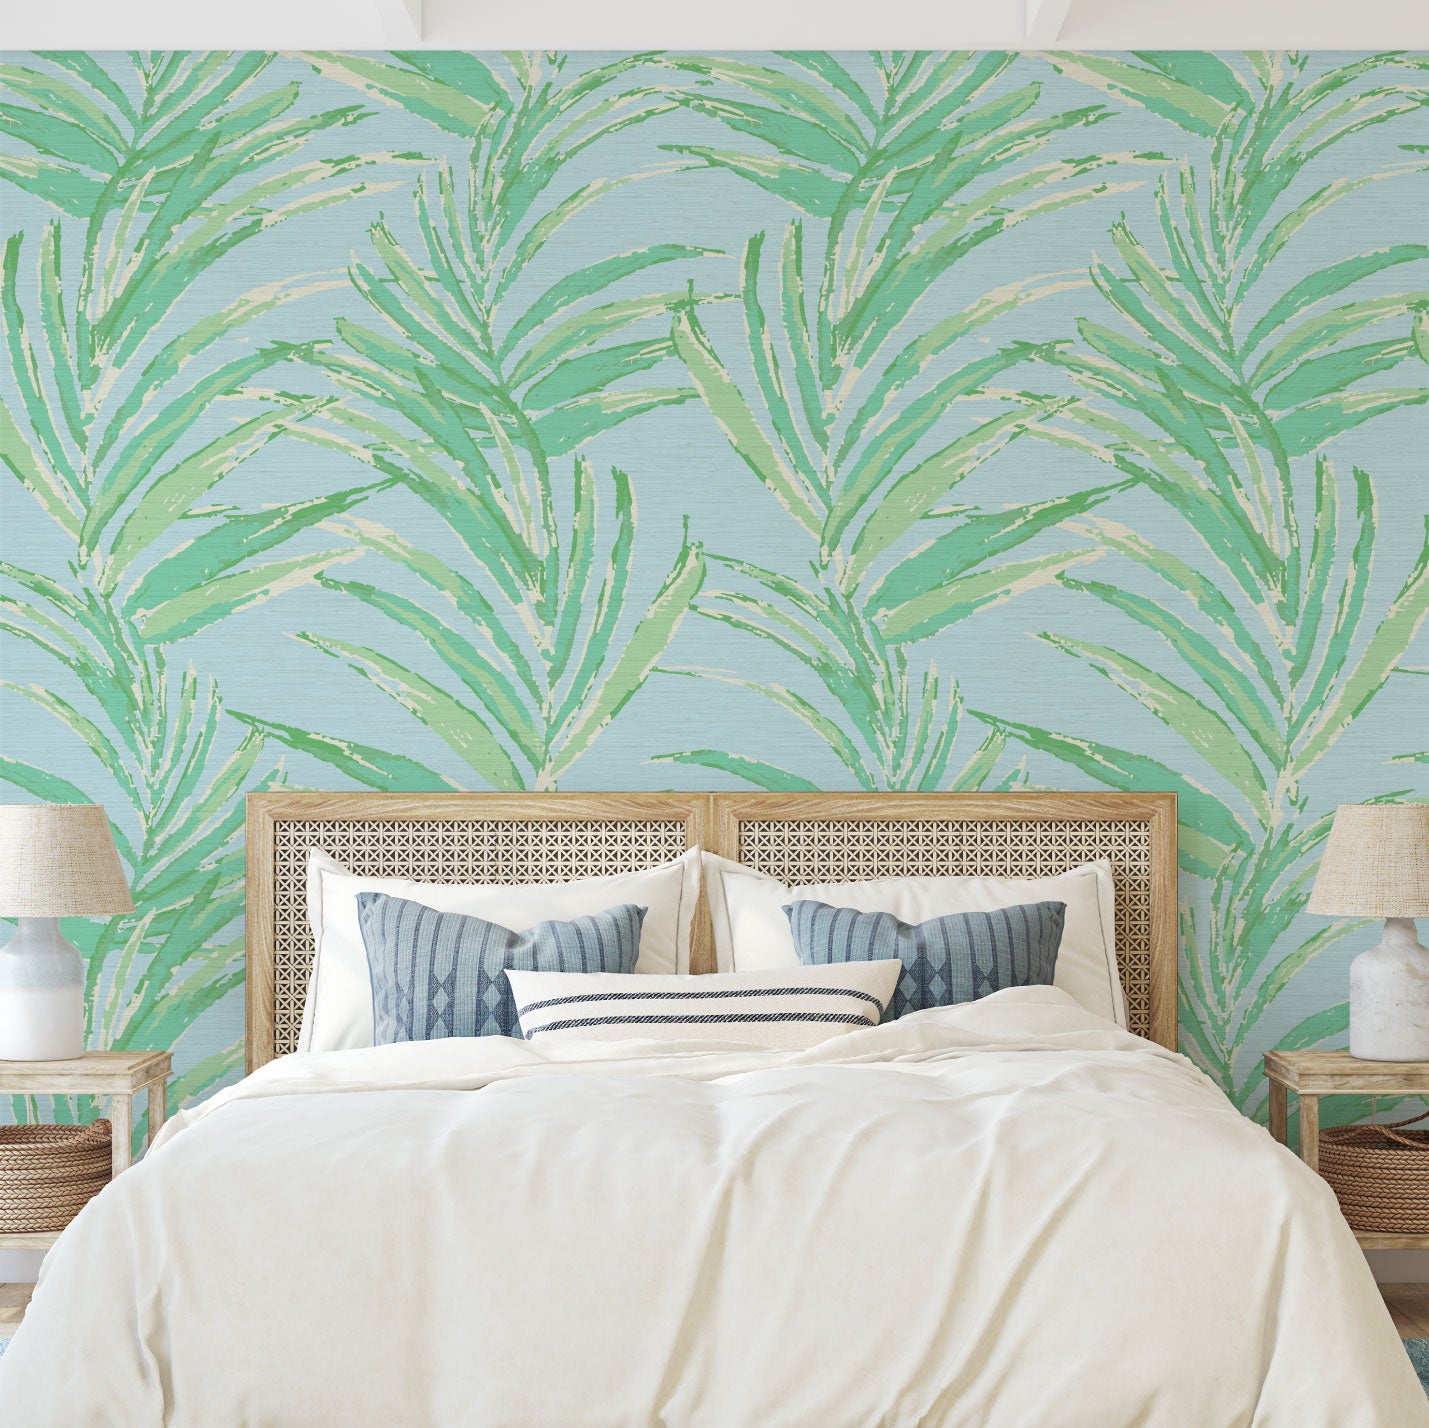 grasscloth printed wallpaper of linear twisted palm leaves vertical oversized stripes Grasscloth Natural Textured Eco-Friendly Non-toxic High-quality Sustainable practices Sustainability Interior Design Wall covering Bold Wallpaper Custom Tailor-made Retro chic Tropical jungle beverly hills hilton hotel palm print garden botanical Coastal Seashore Waterfront Vacation home styling Retreat Relaxed beach vibes Beach cottage Shoreline beverly hills hotel ocean blue sky light baby pastel green mint sage bedroom